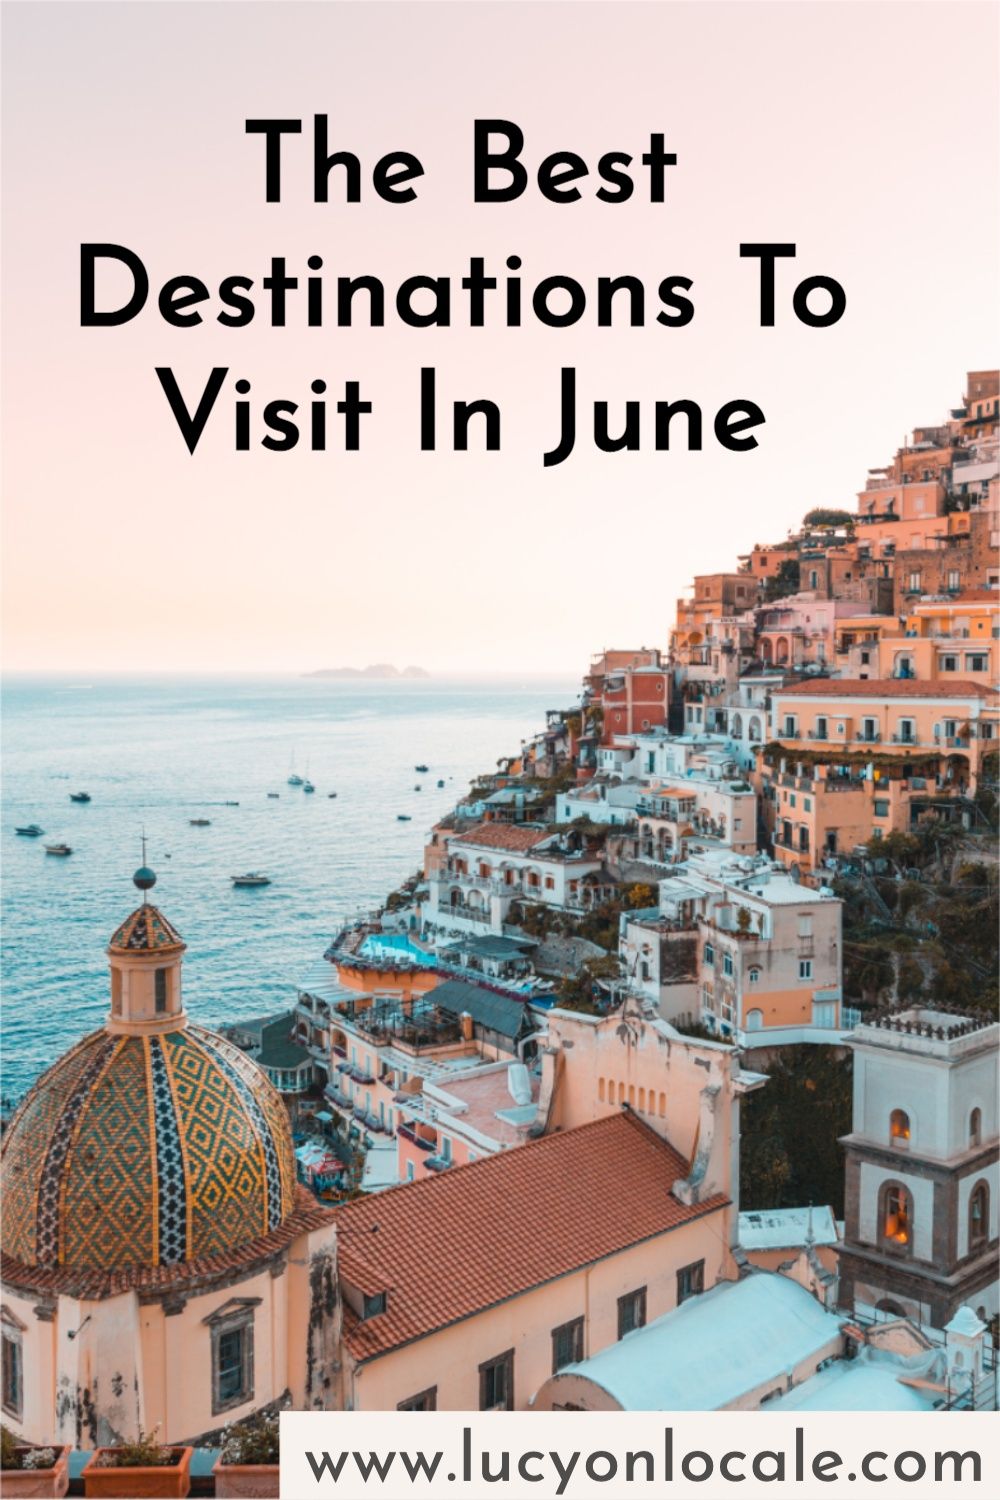 The Best Destinations To Visit In June